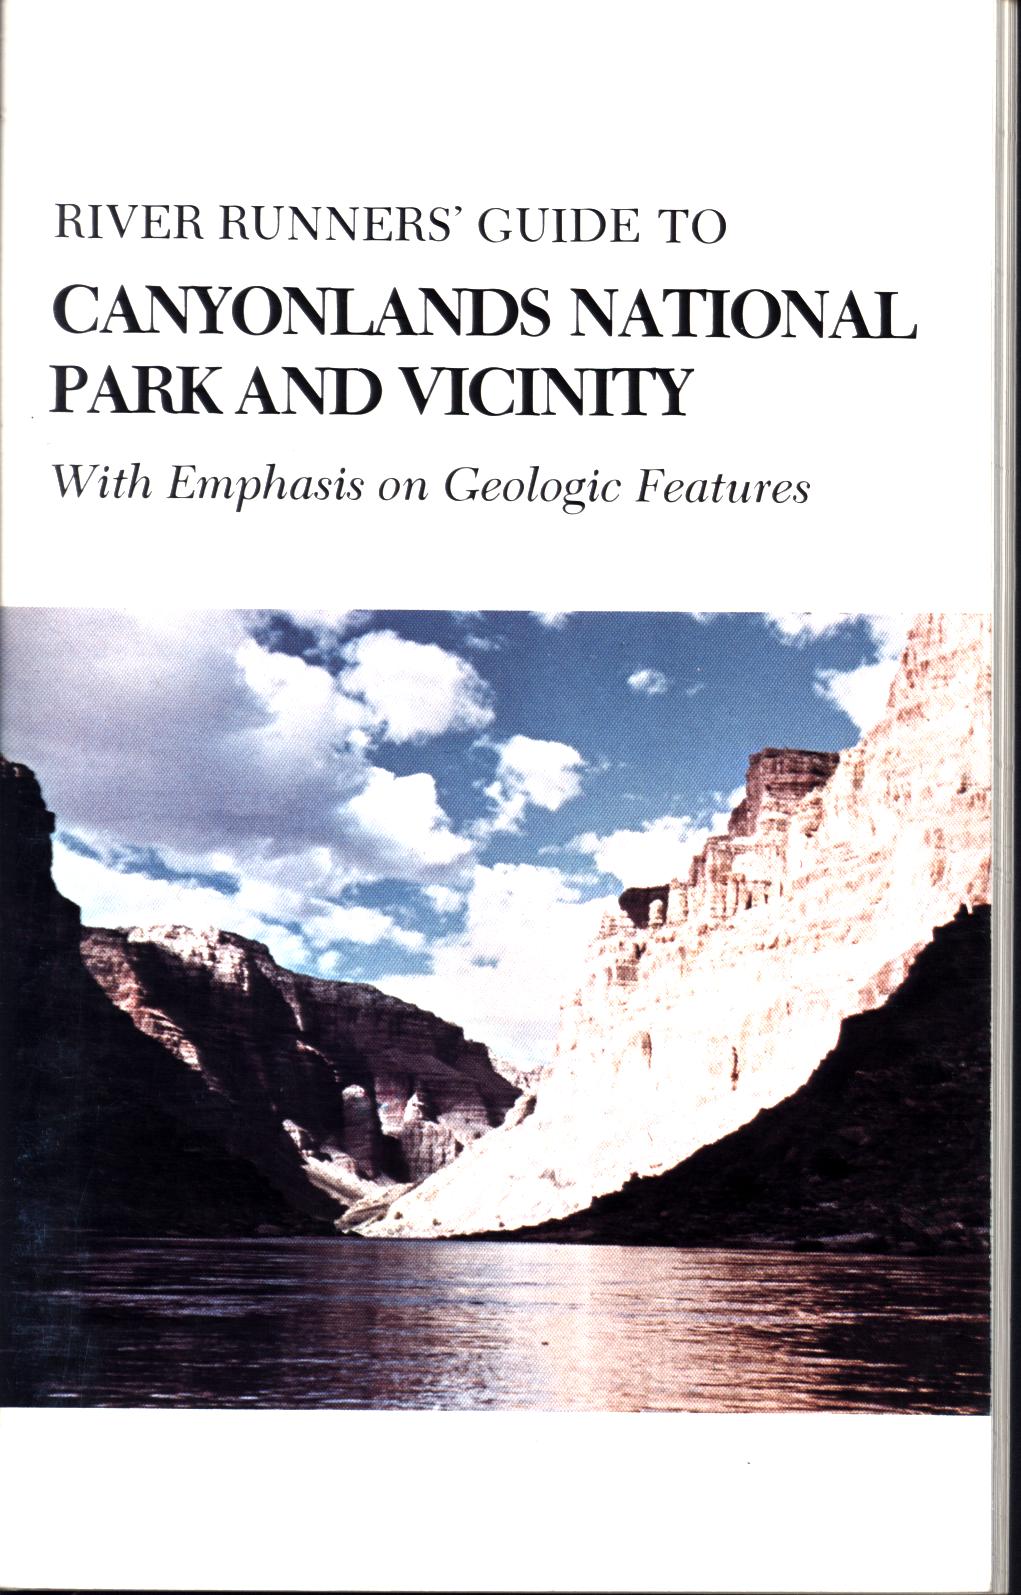 RIVER RUNNER'S GUIDE TO CANYONLANDS NATIONAL PARK & VICINITY: with emphasis on geologic features. by Felix E. Mutschler.